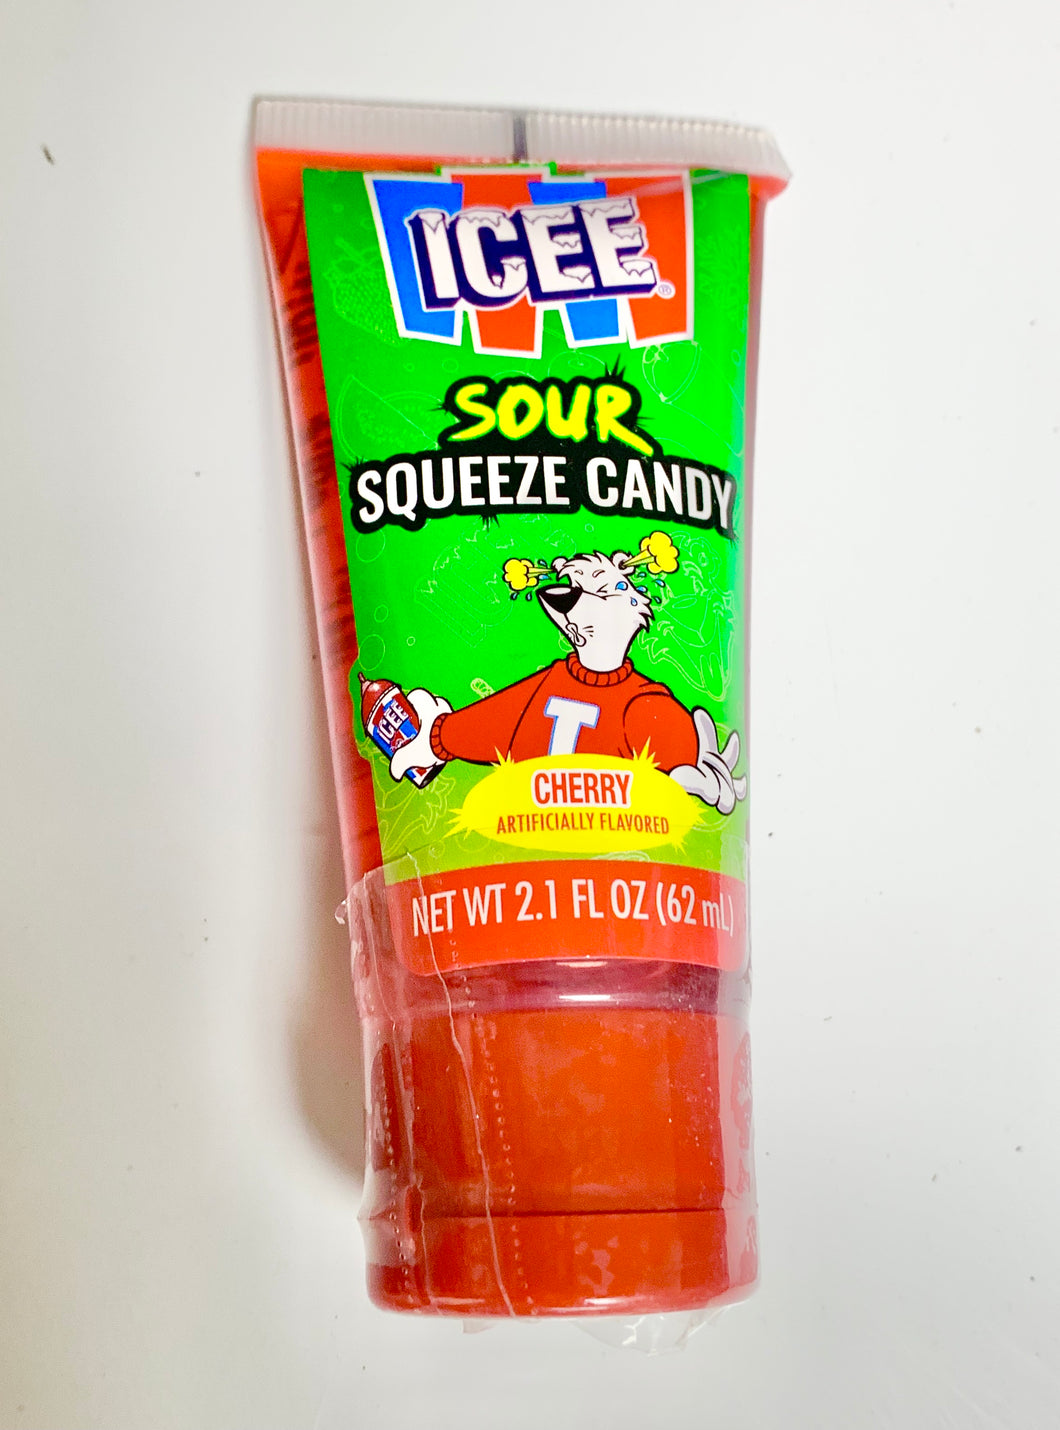 Icee Sour Squeeze Candy - Cherry